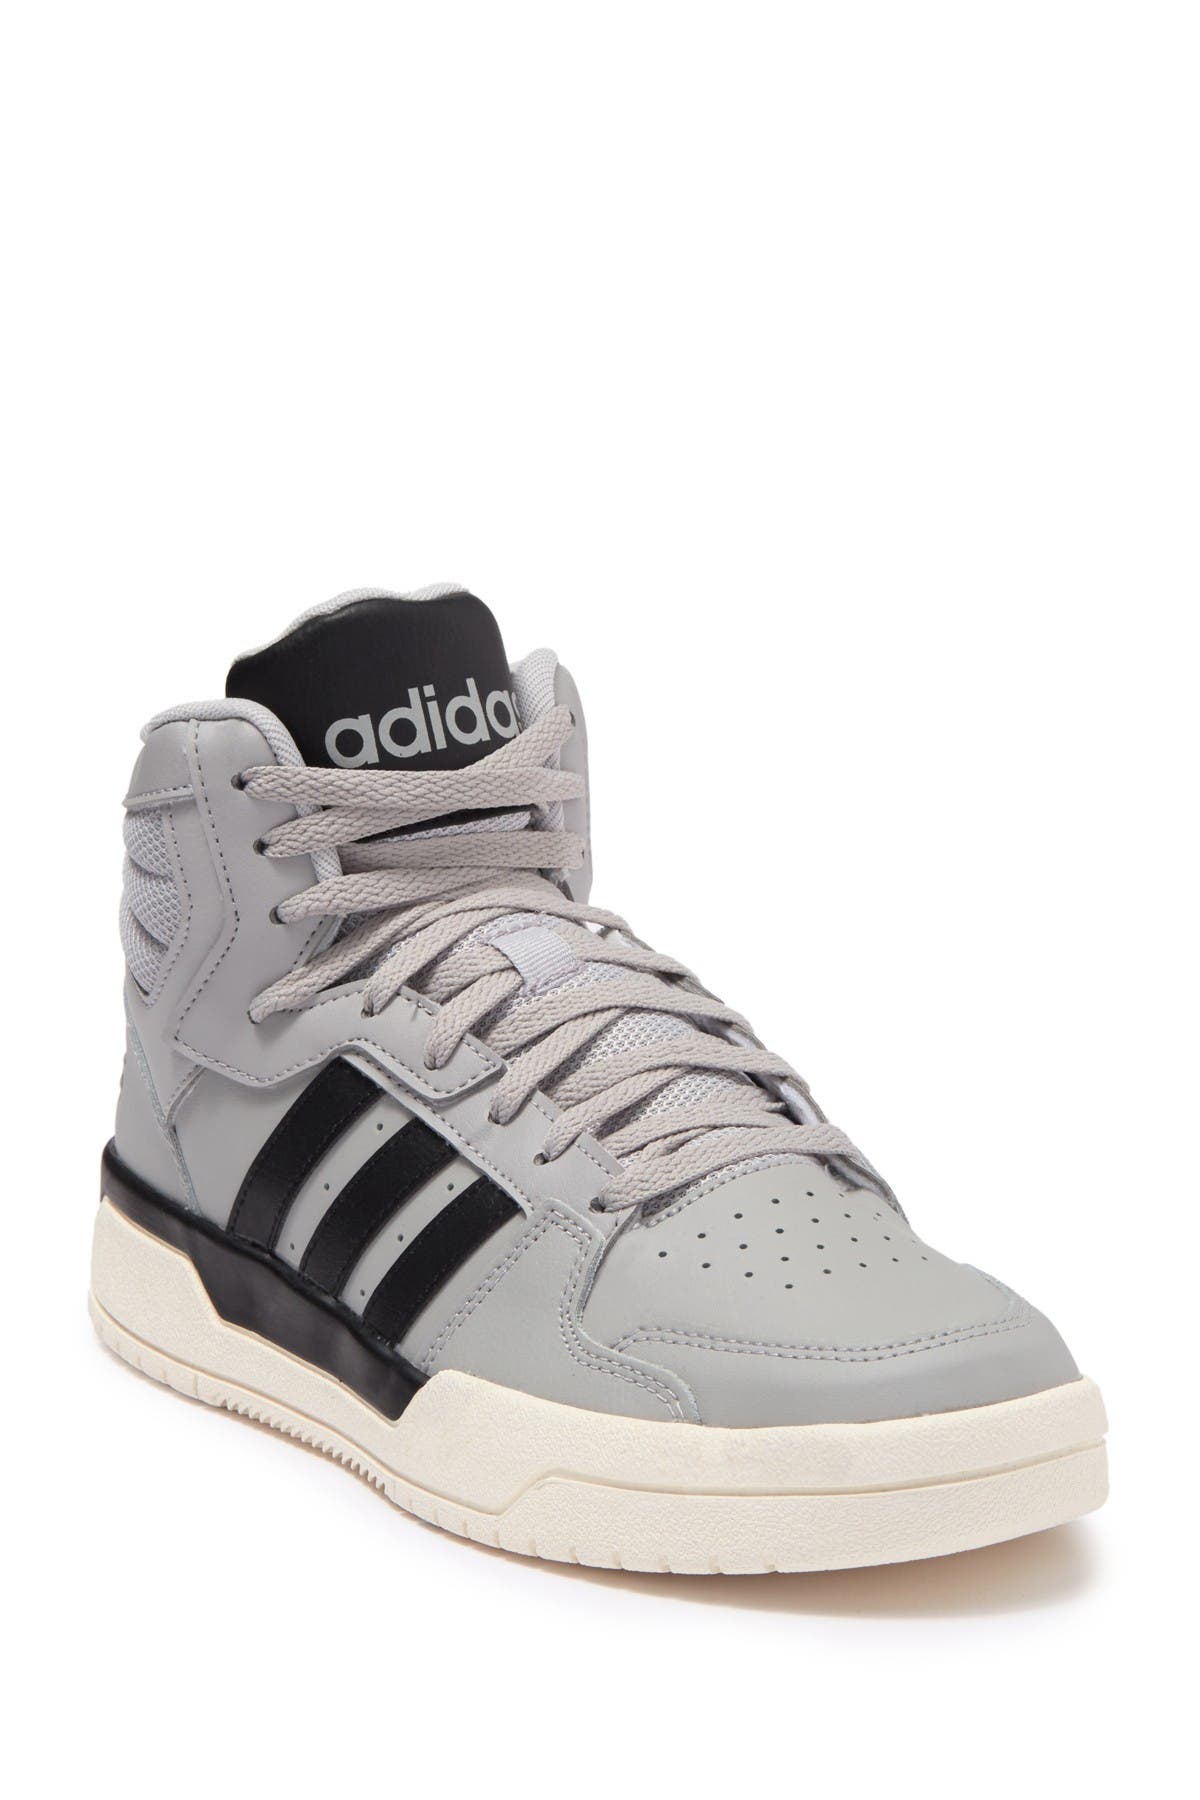 adidas entrap mid review